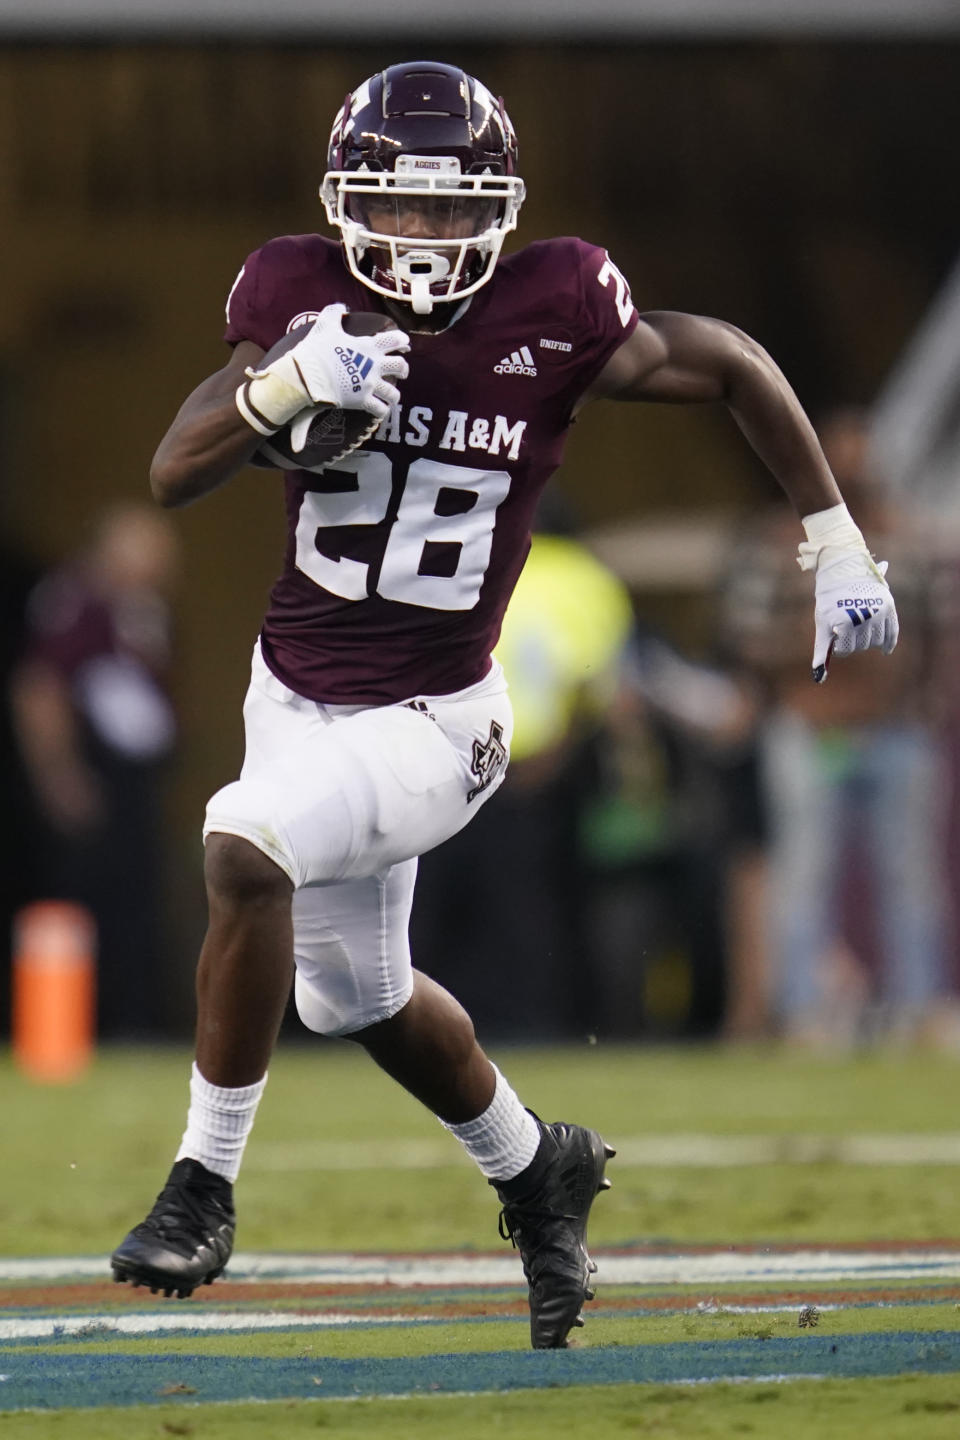 Texas A&M running back Isaiah Spiller (28) breaks to the outside against Kent State for a first down run during the first quarter of an NCAA college football game on Saturday, Sept. 4, 2021, in College Station, Texas. (AP Photo/Sam Craft)